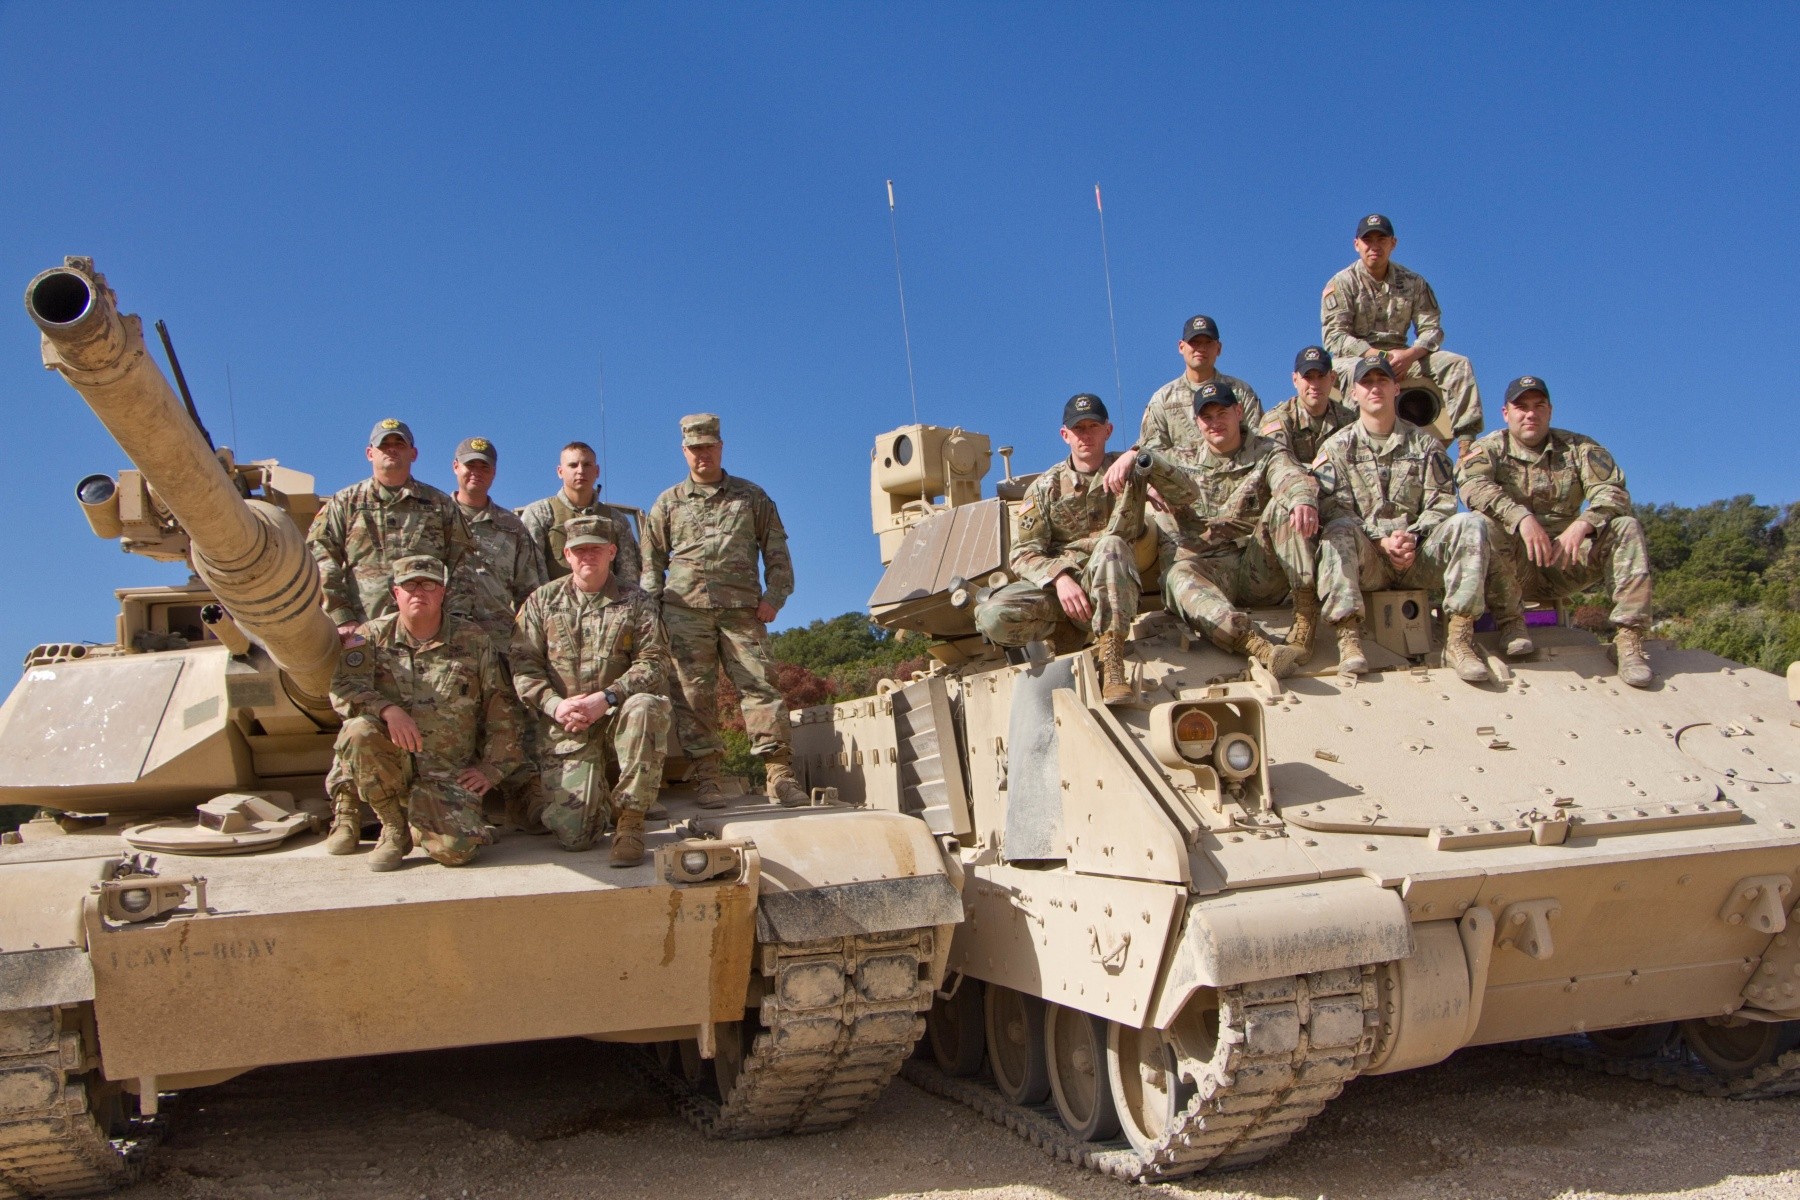 Master gunners bring expertise to brigade combat team  Article  Hire  